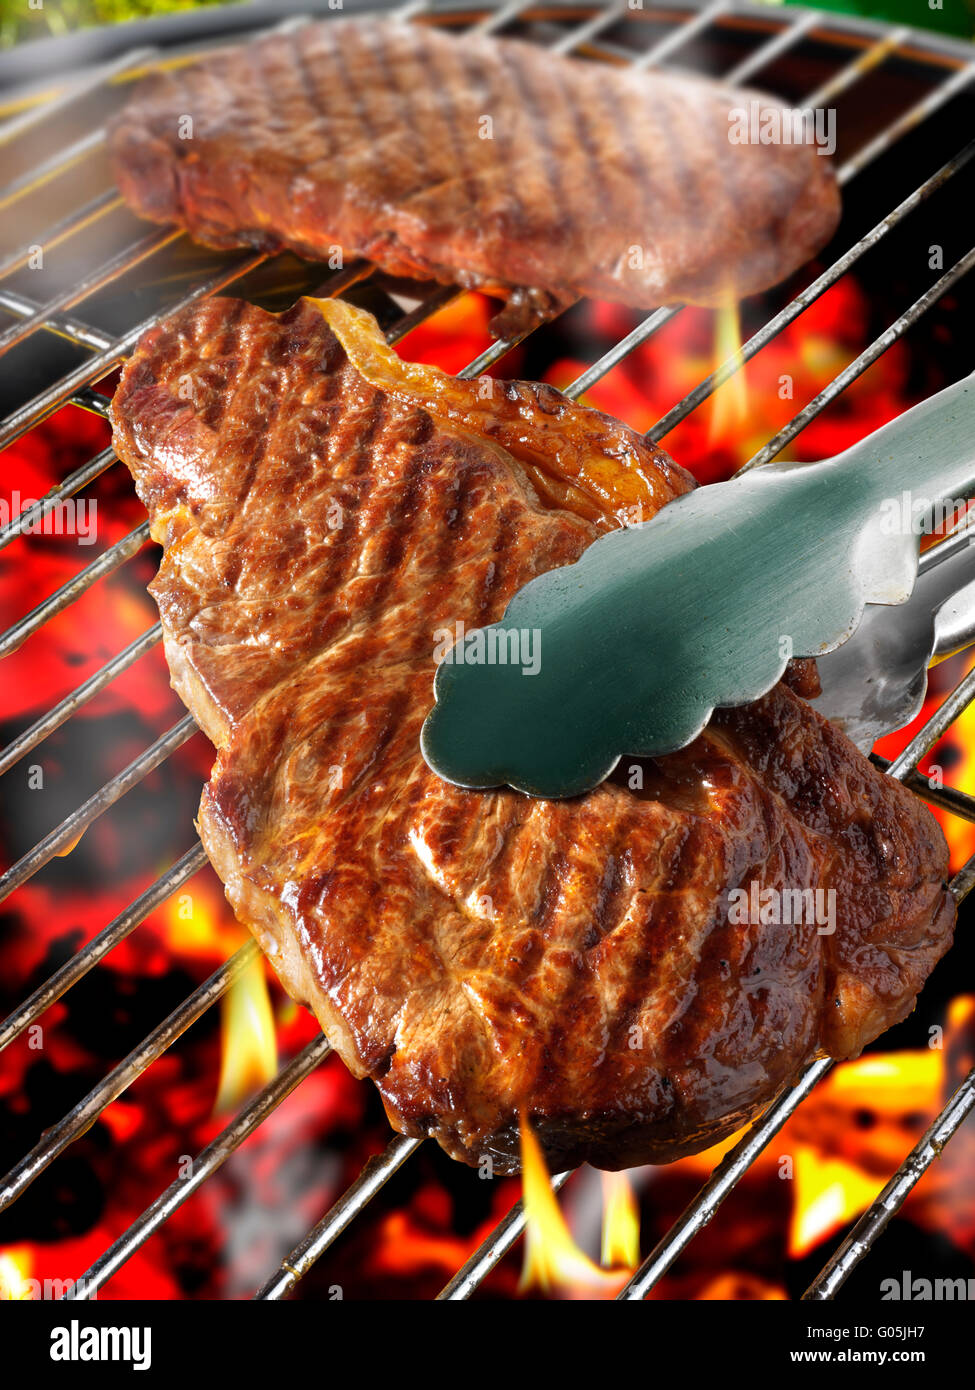 Barbecue steak cooking on a flame bbq grill Stock Photo